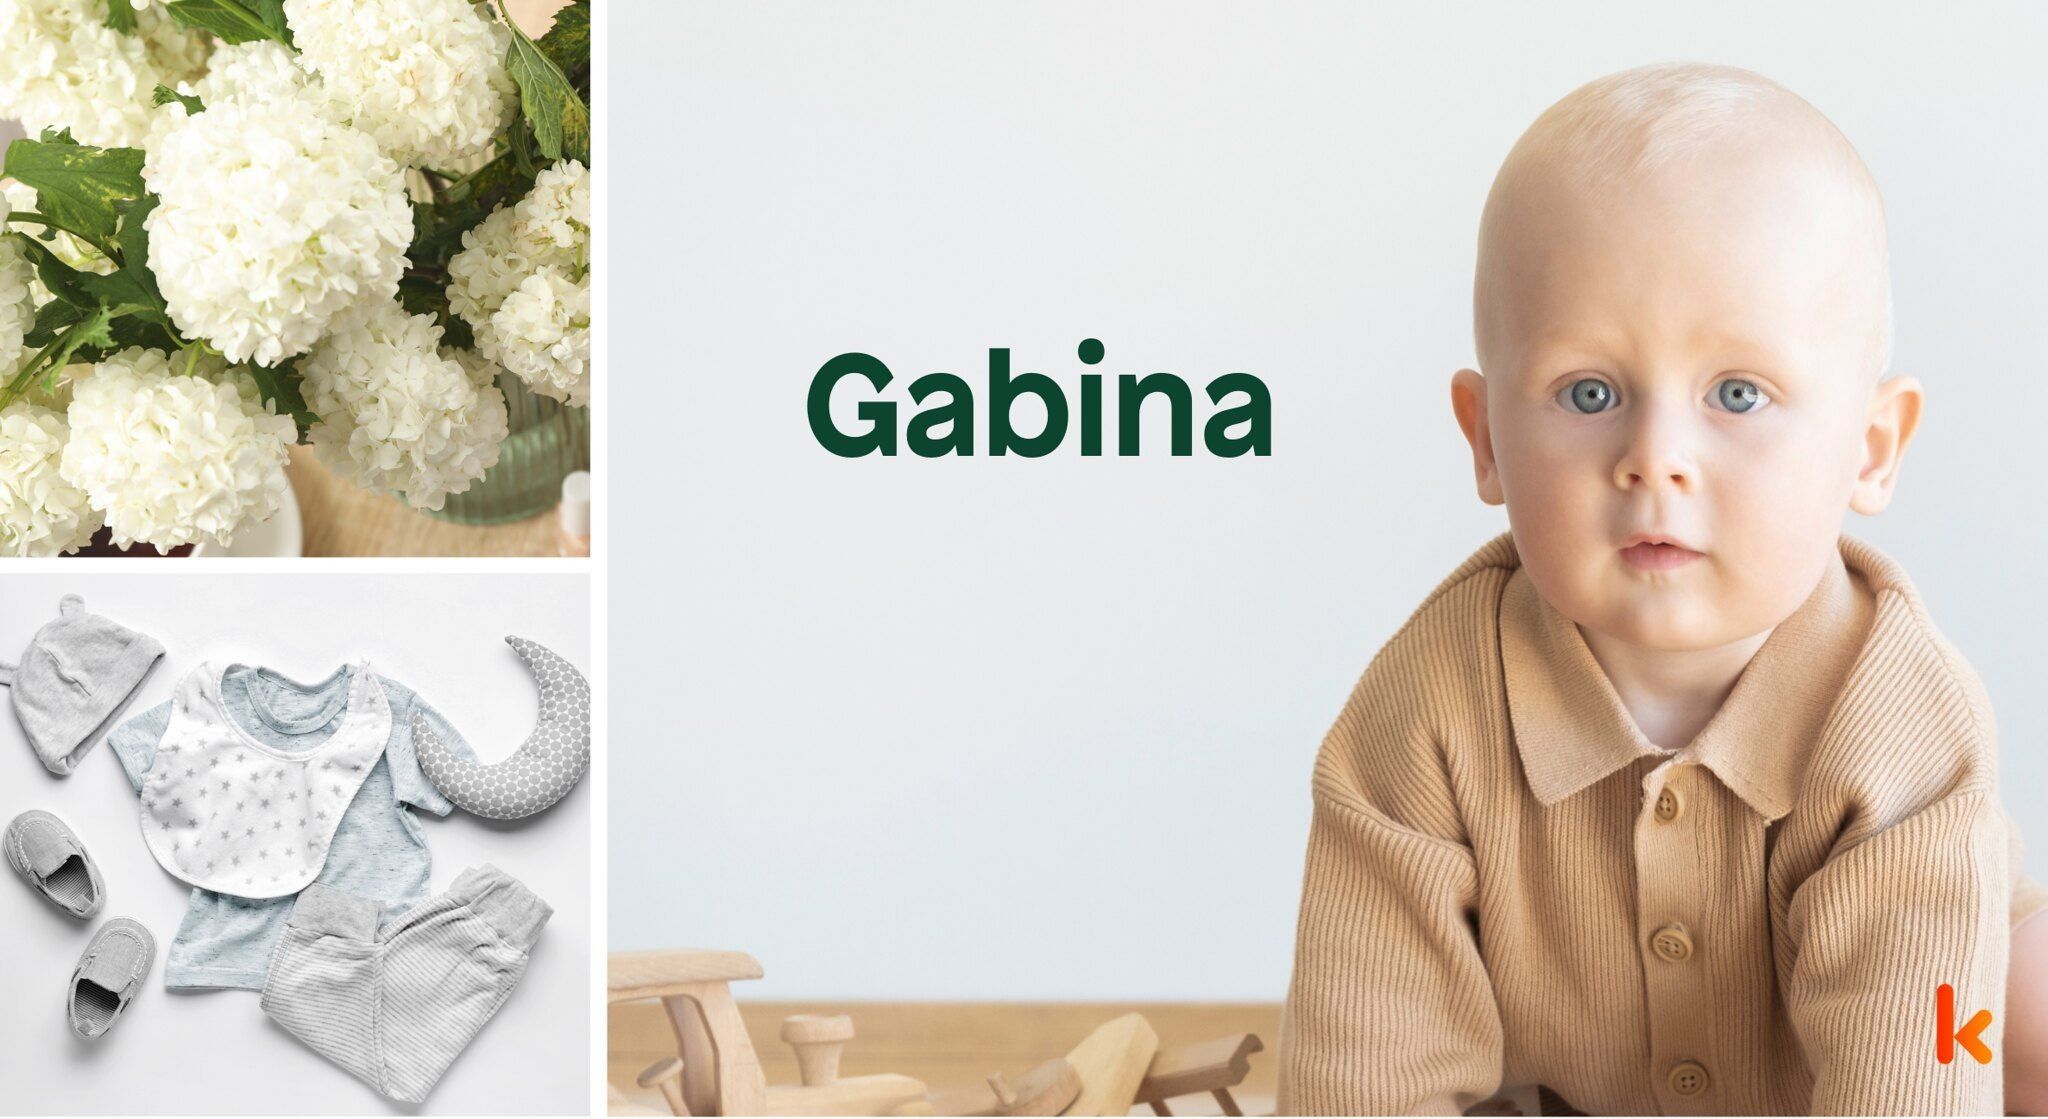 Meaning of the name Gabina